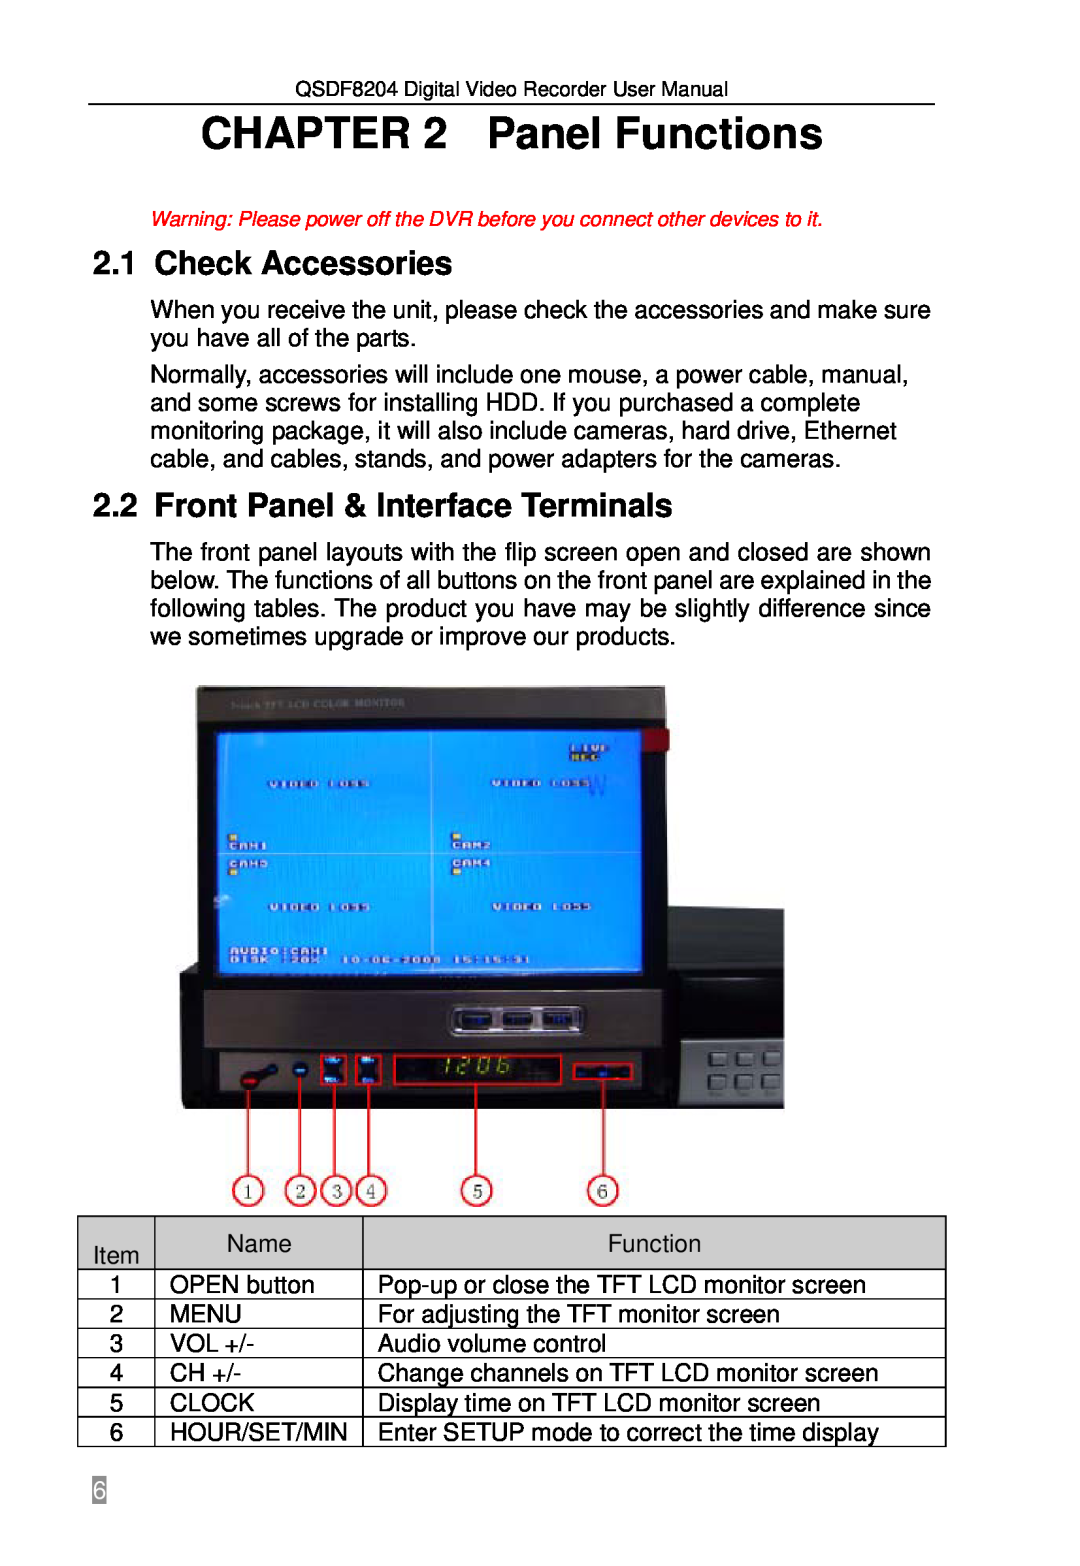 Q-See QSDF8204 user manual Panel Functions, Check Accessories, Front Panel & Interface Terminals 